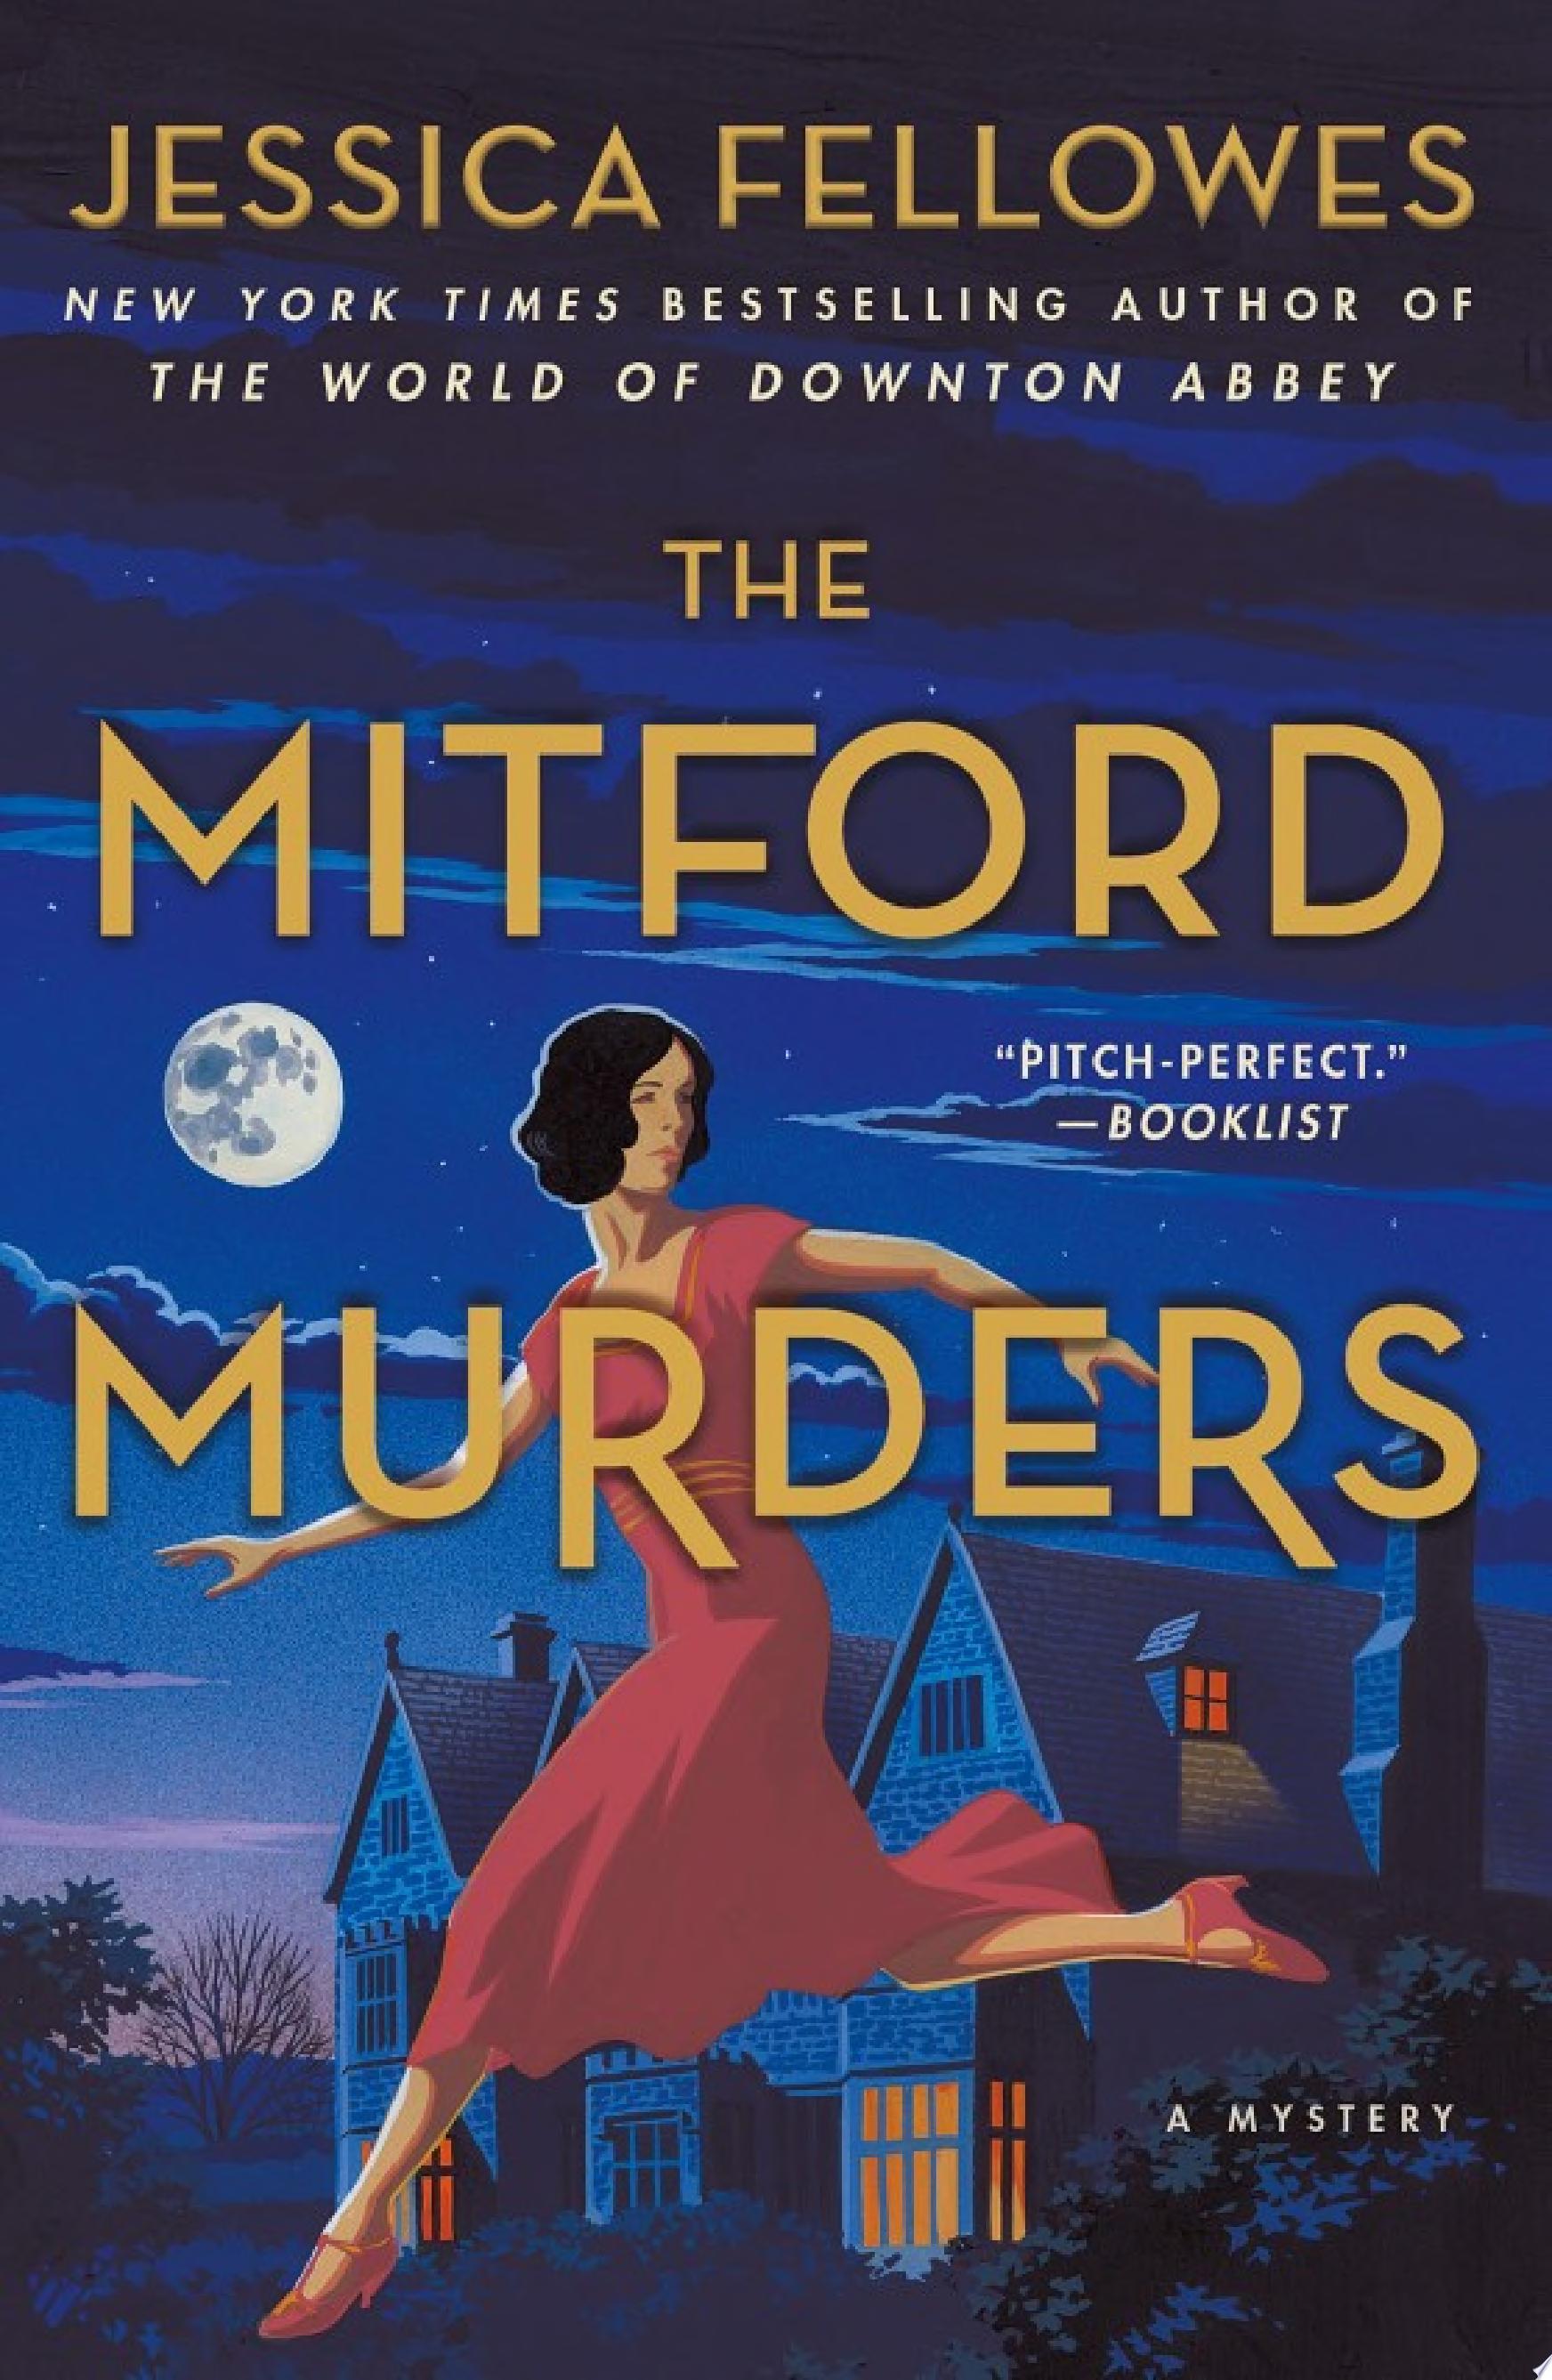 Image for "The Mitford Murders"